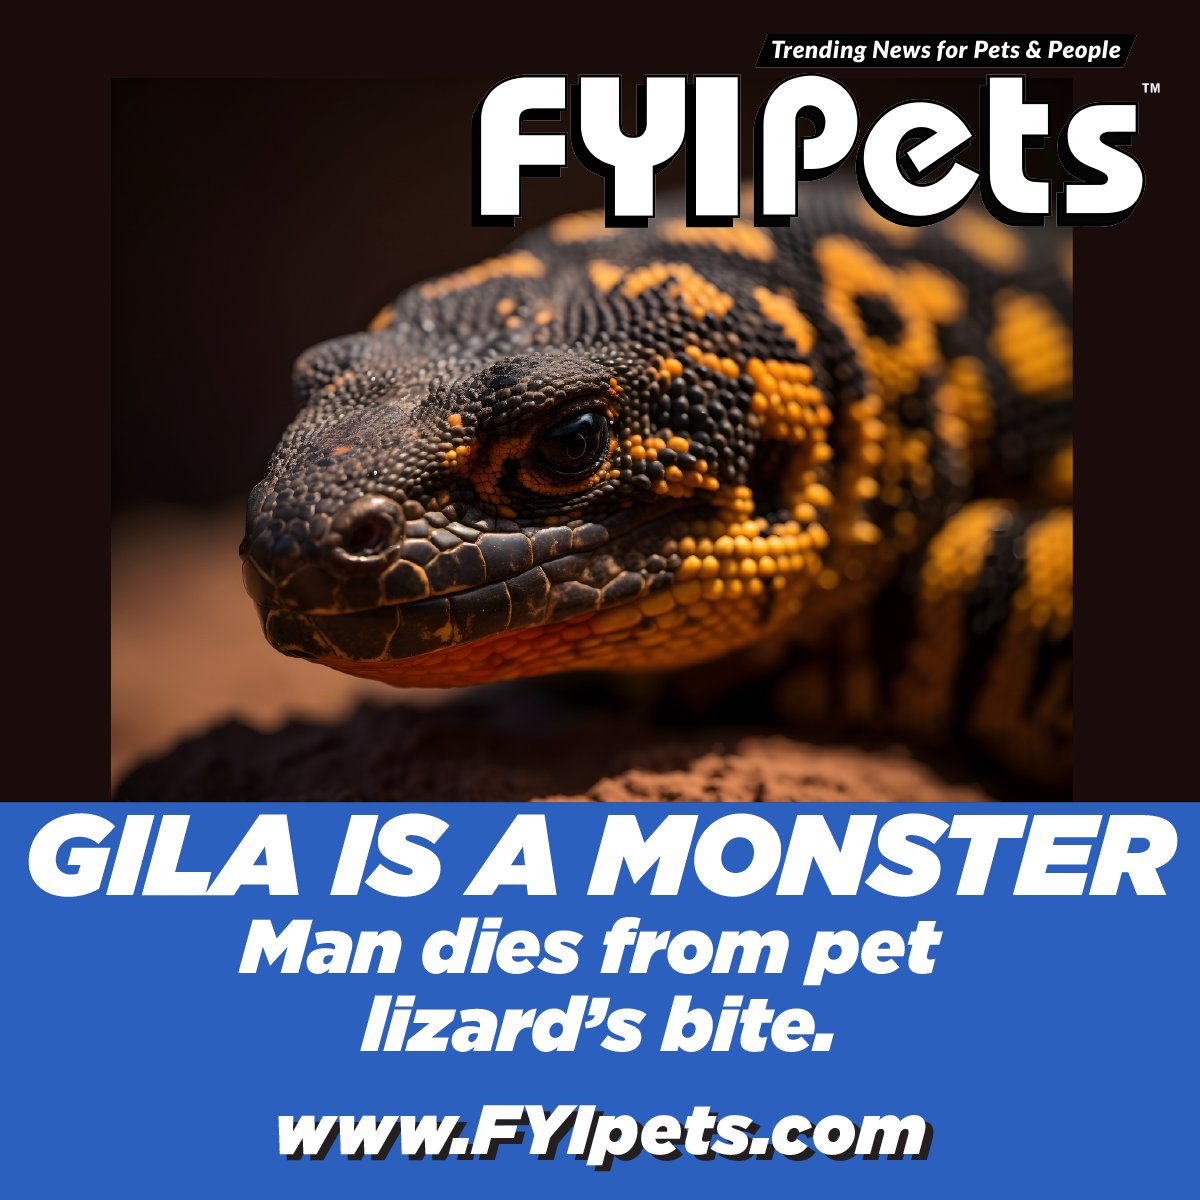 FYIpets.com

#fyipets #gilamonster #reptiles #lizards #exoticpets #petowners #petlovers #animallover #animalbites #petlizard #petreptile #reptilelover #lizardlover #venom #venomousreptiles #PetHazards #hazardouspets #exoticpetcare #exoticpetlovers